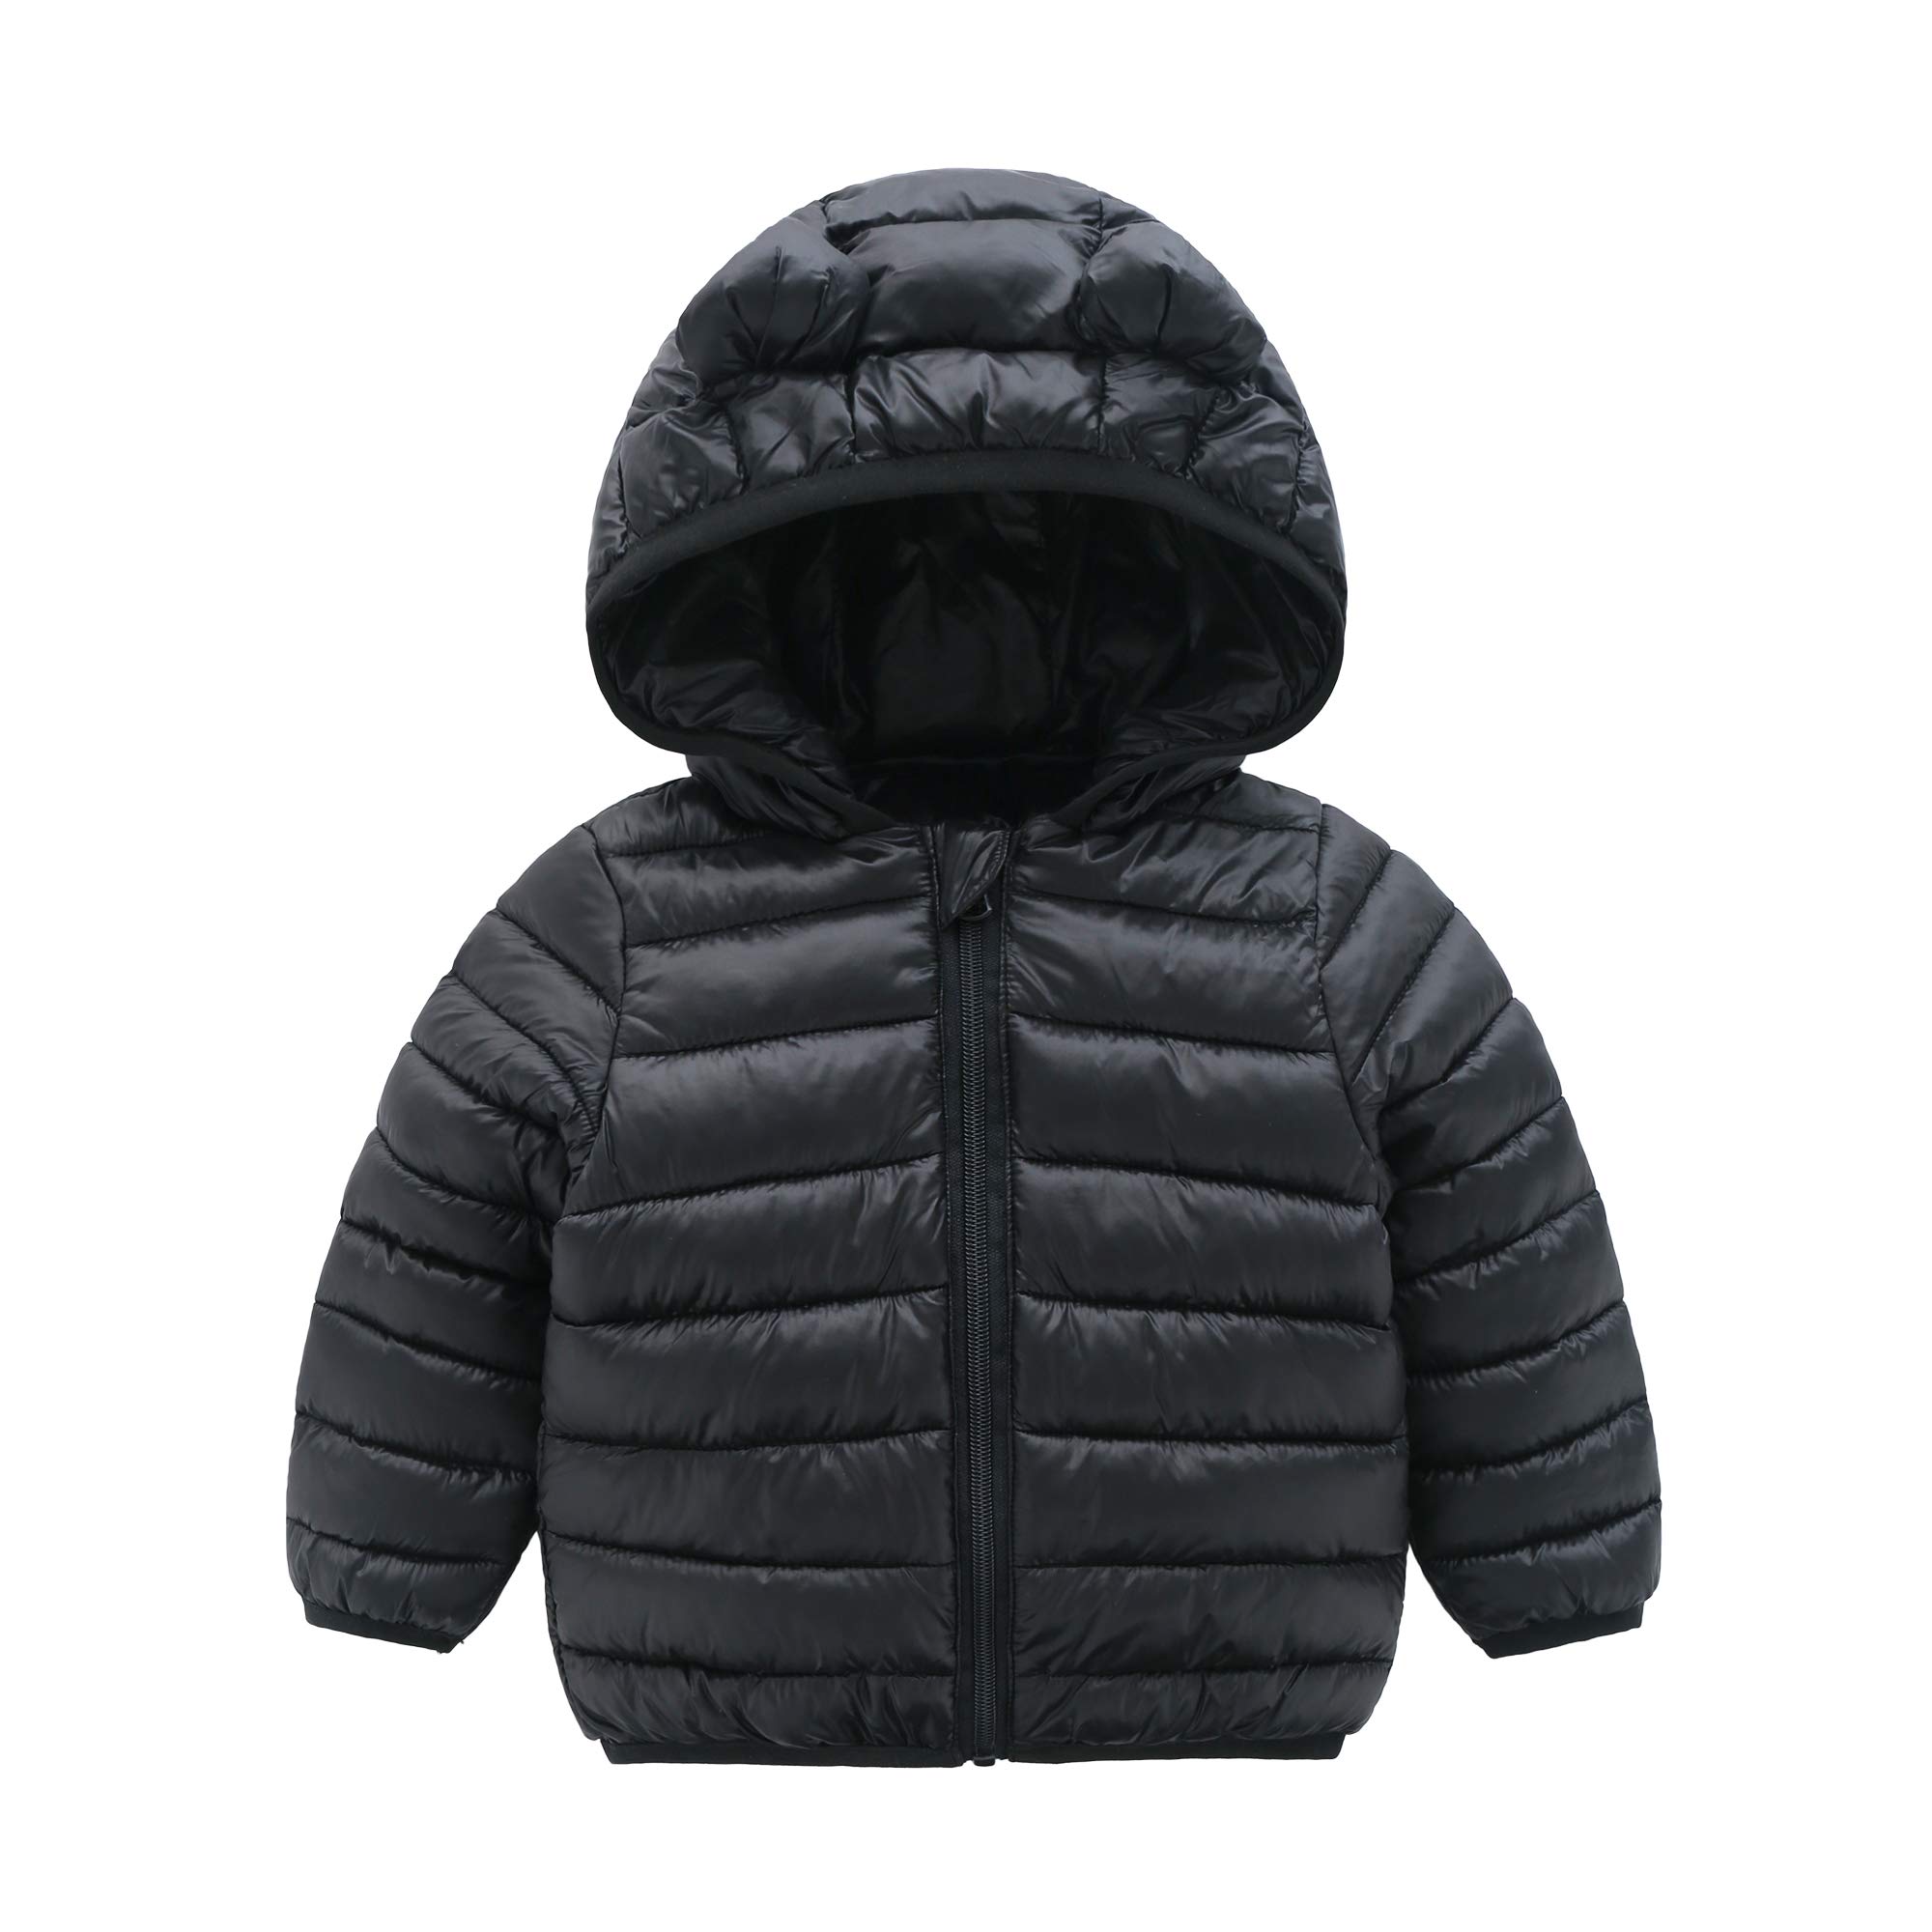 CECORC Winter Coats for Kids with Hoods (Padded) Light Puffer Jacket for Baby Boys Girls, Infants, Toddlers…